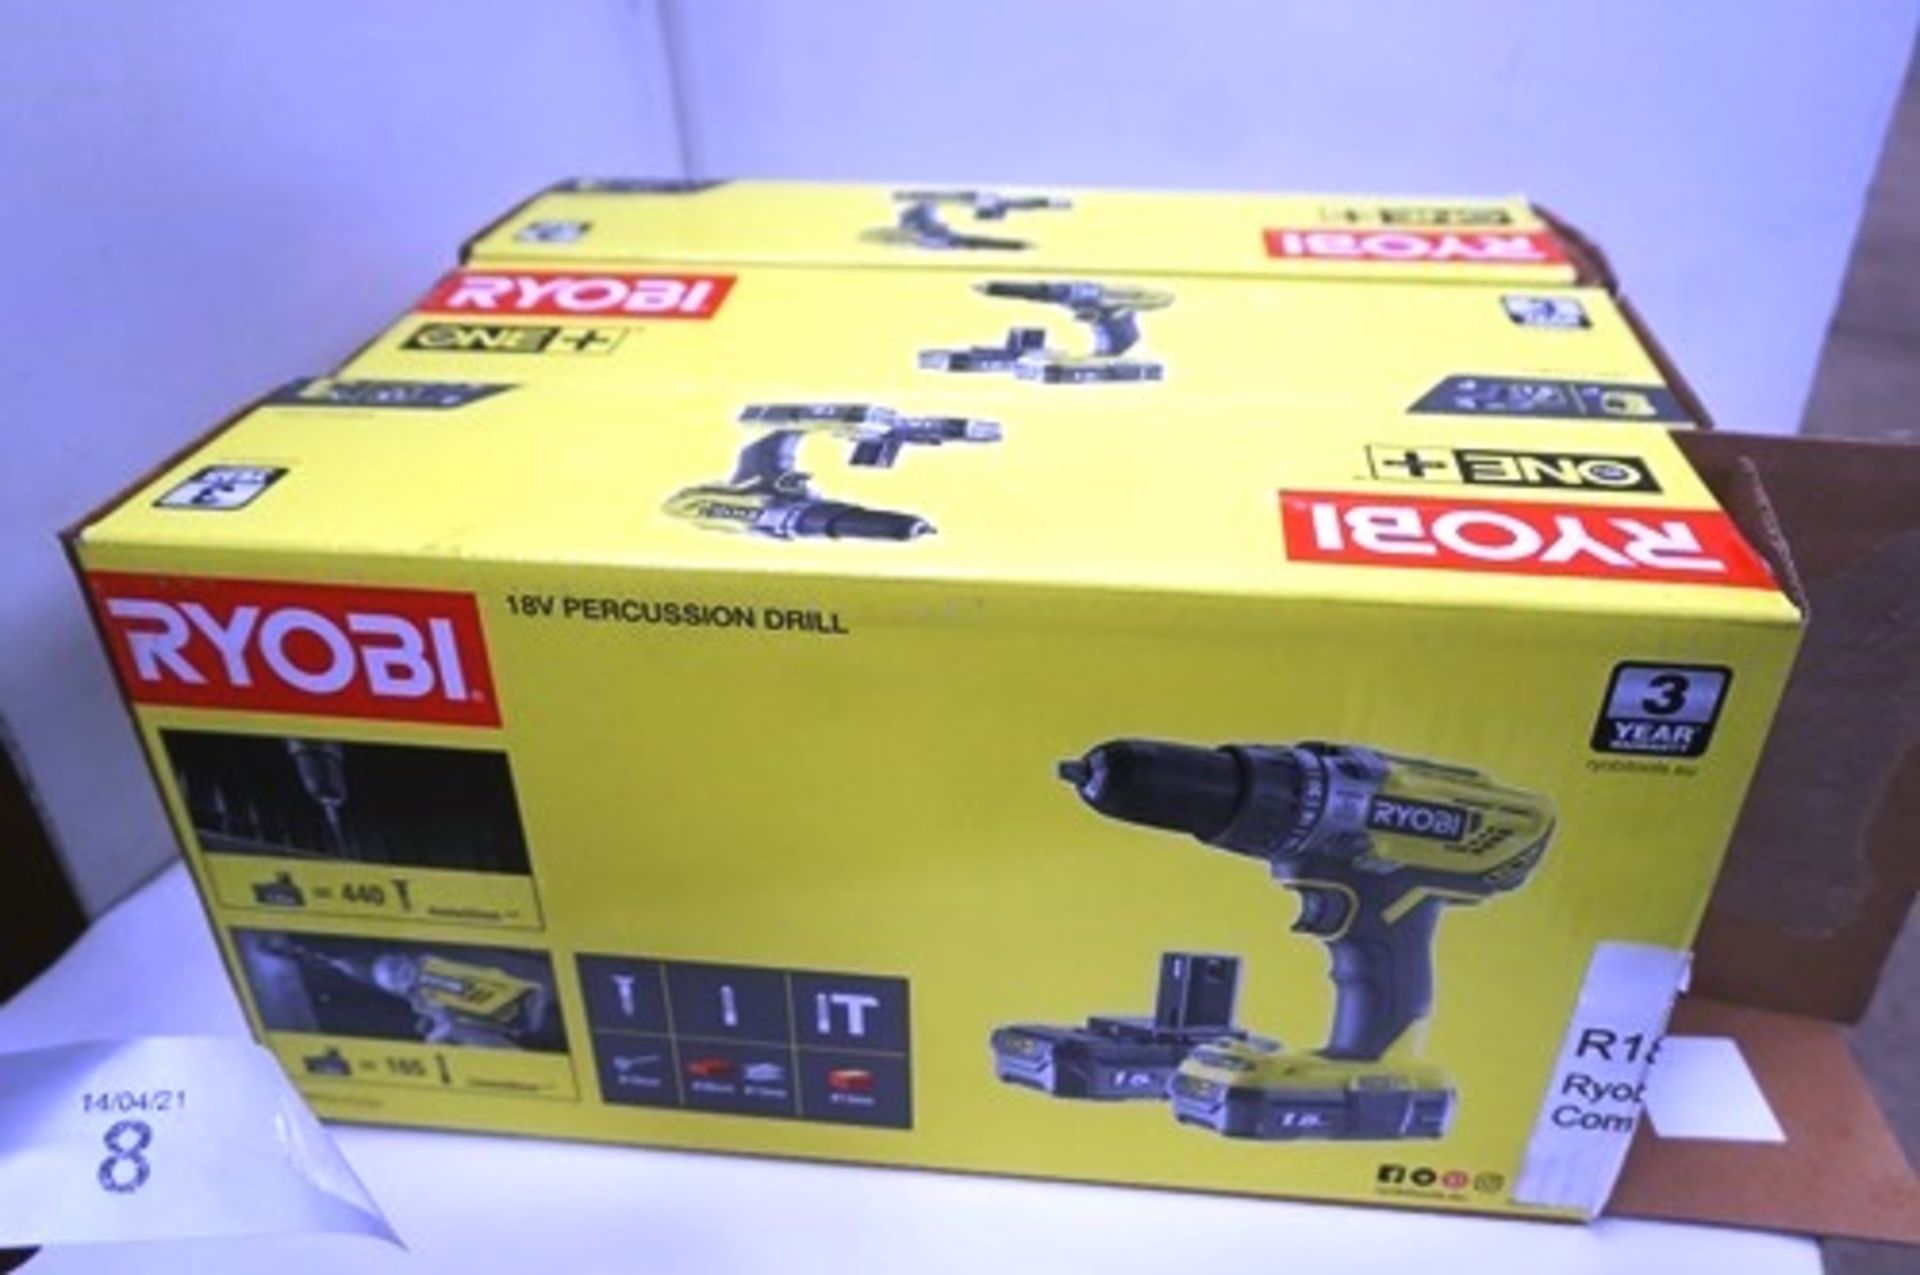 3 x Ryobi 18V percussion cordless drill sets, body only, no battery or charger (TC3) - Image 2 of 2